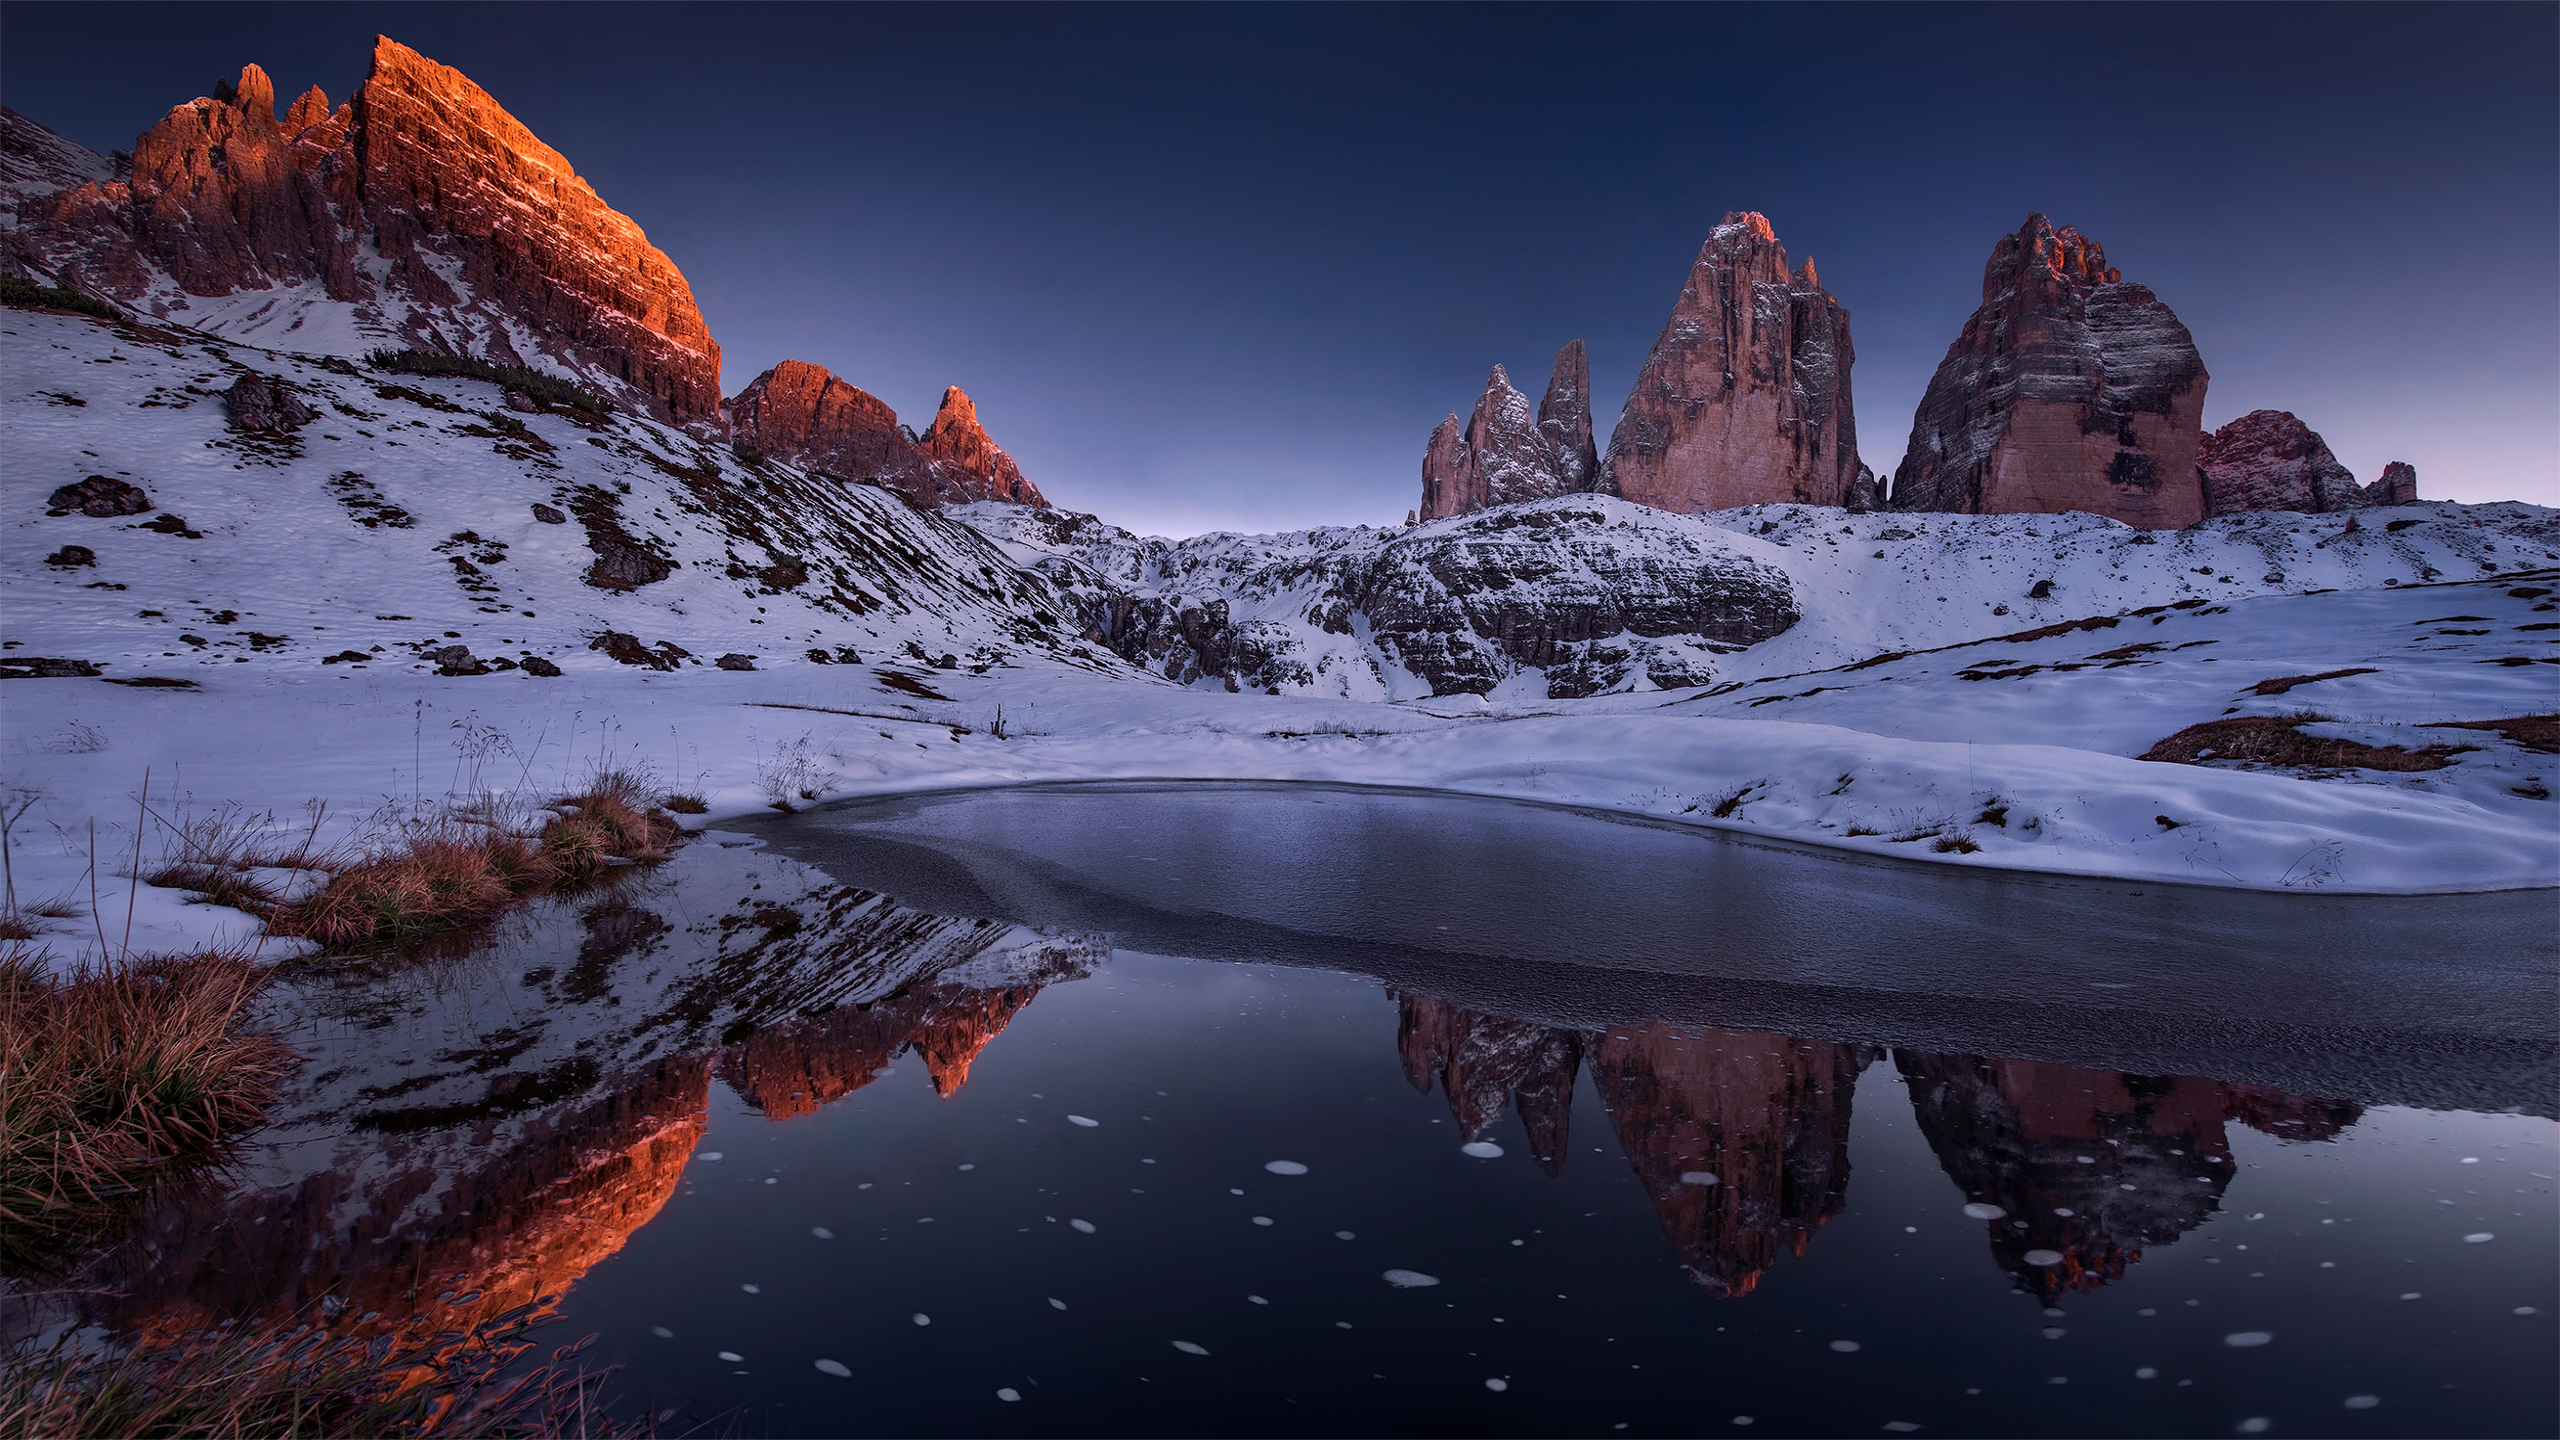 Dolomites By Max Rive Submitted To WqHD Wallpaper Jataw Thread